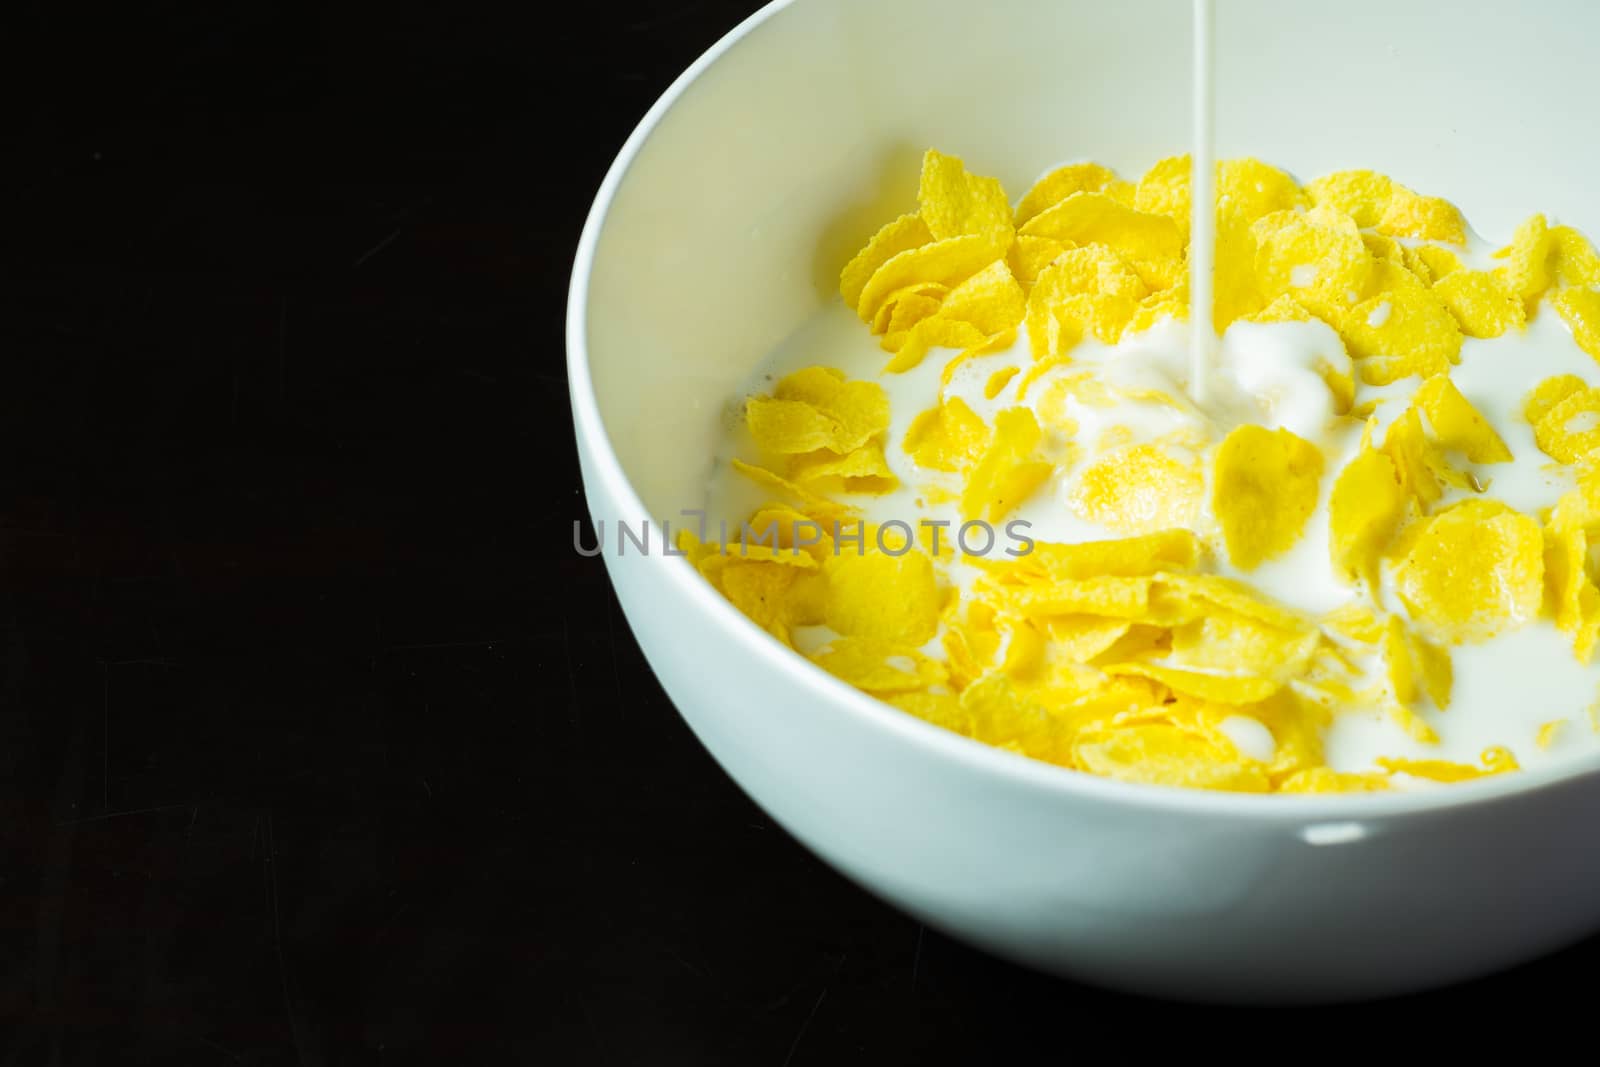 cornflakes in bowl on black table by moggara12